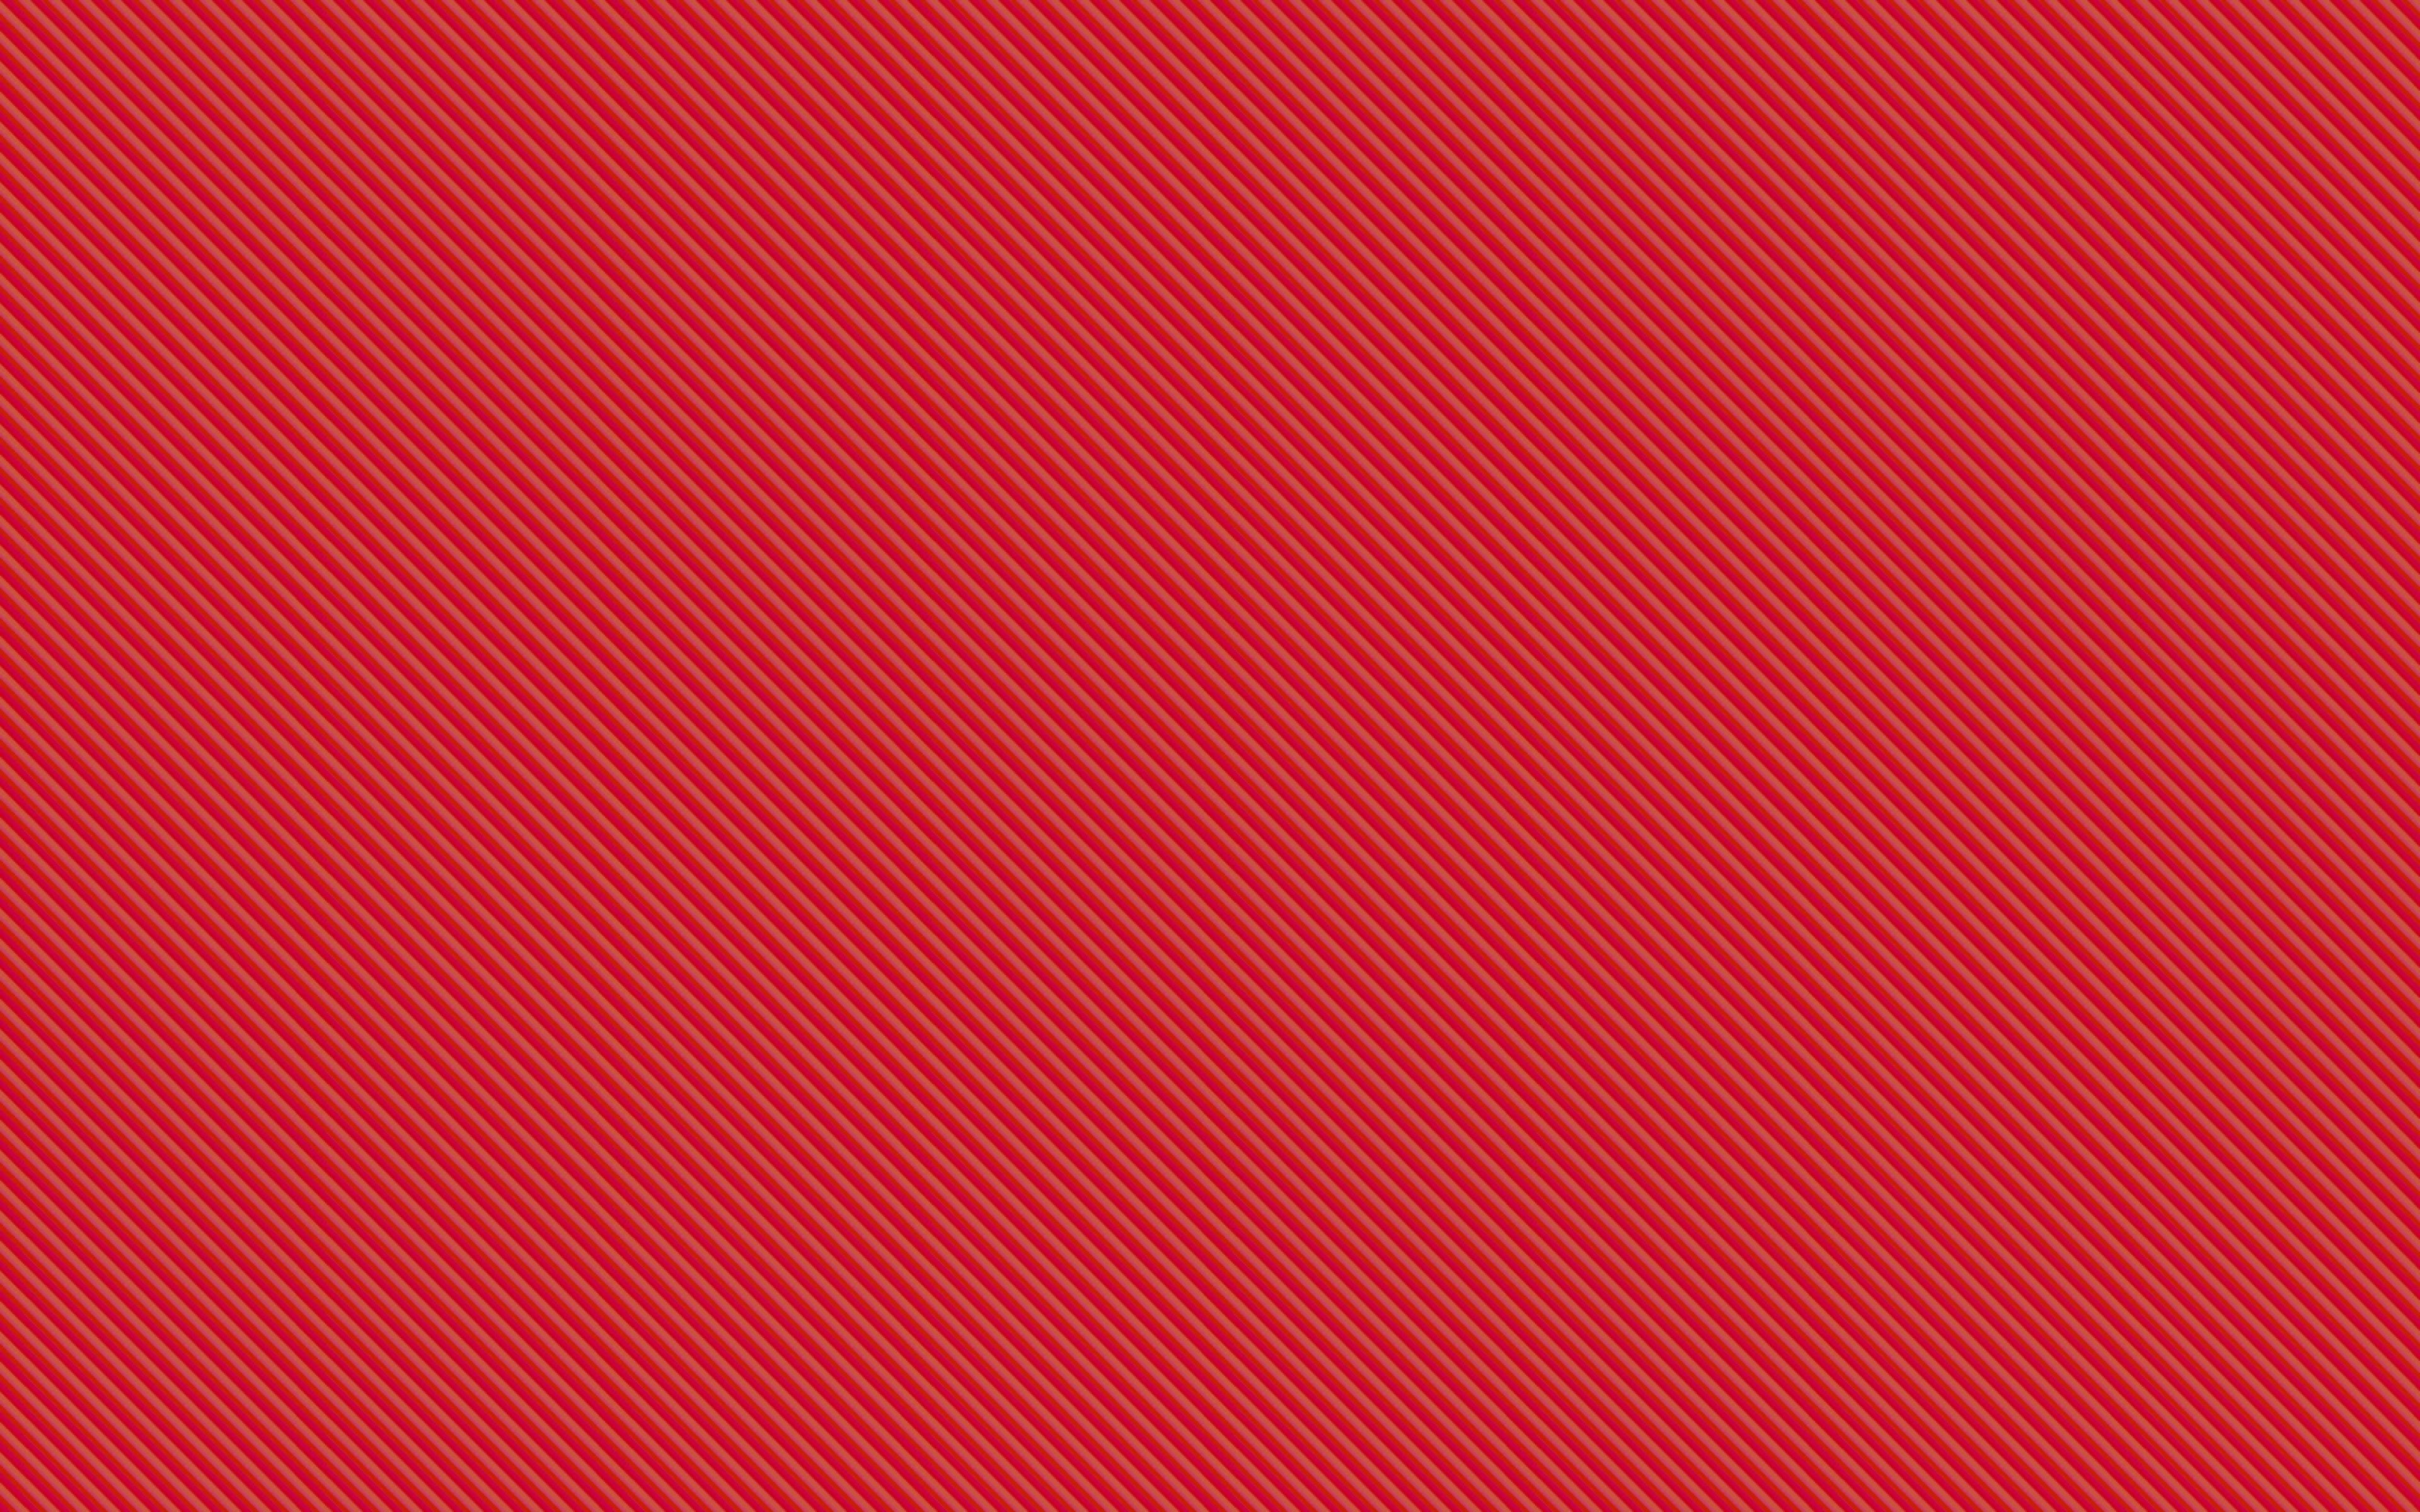 Solid Red Background Images  Free Download on Freepik